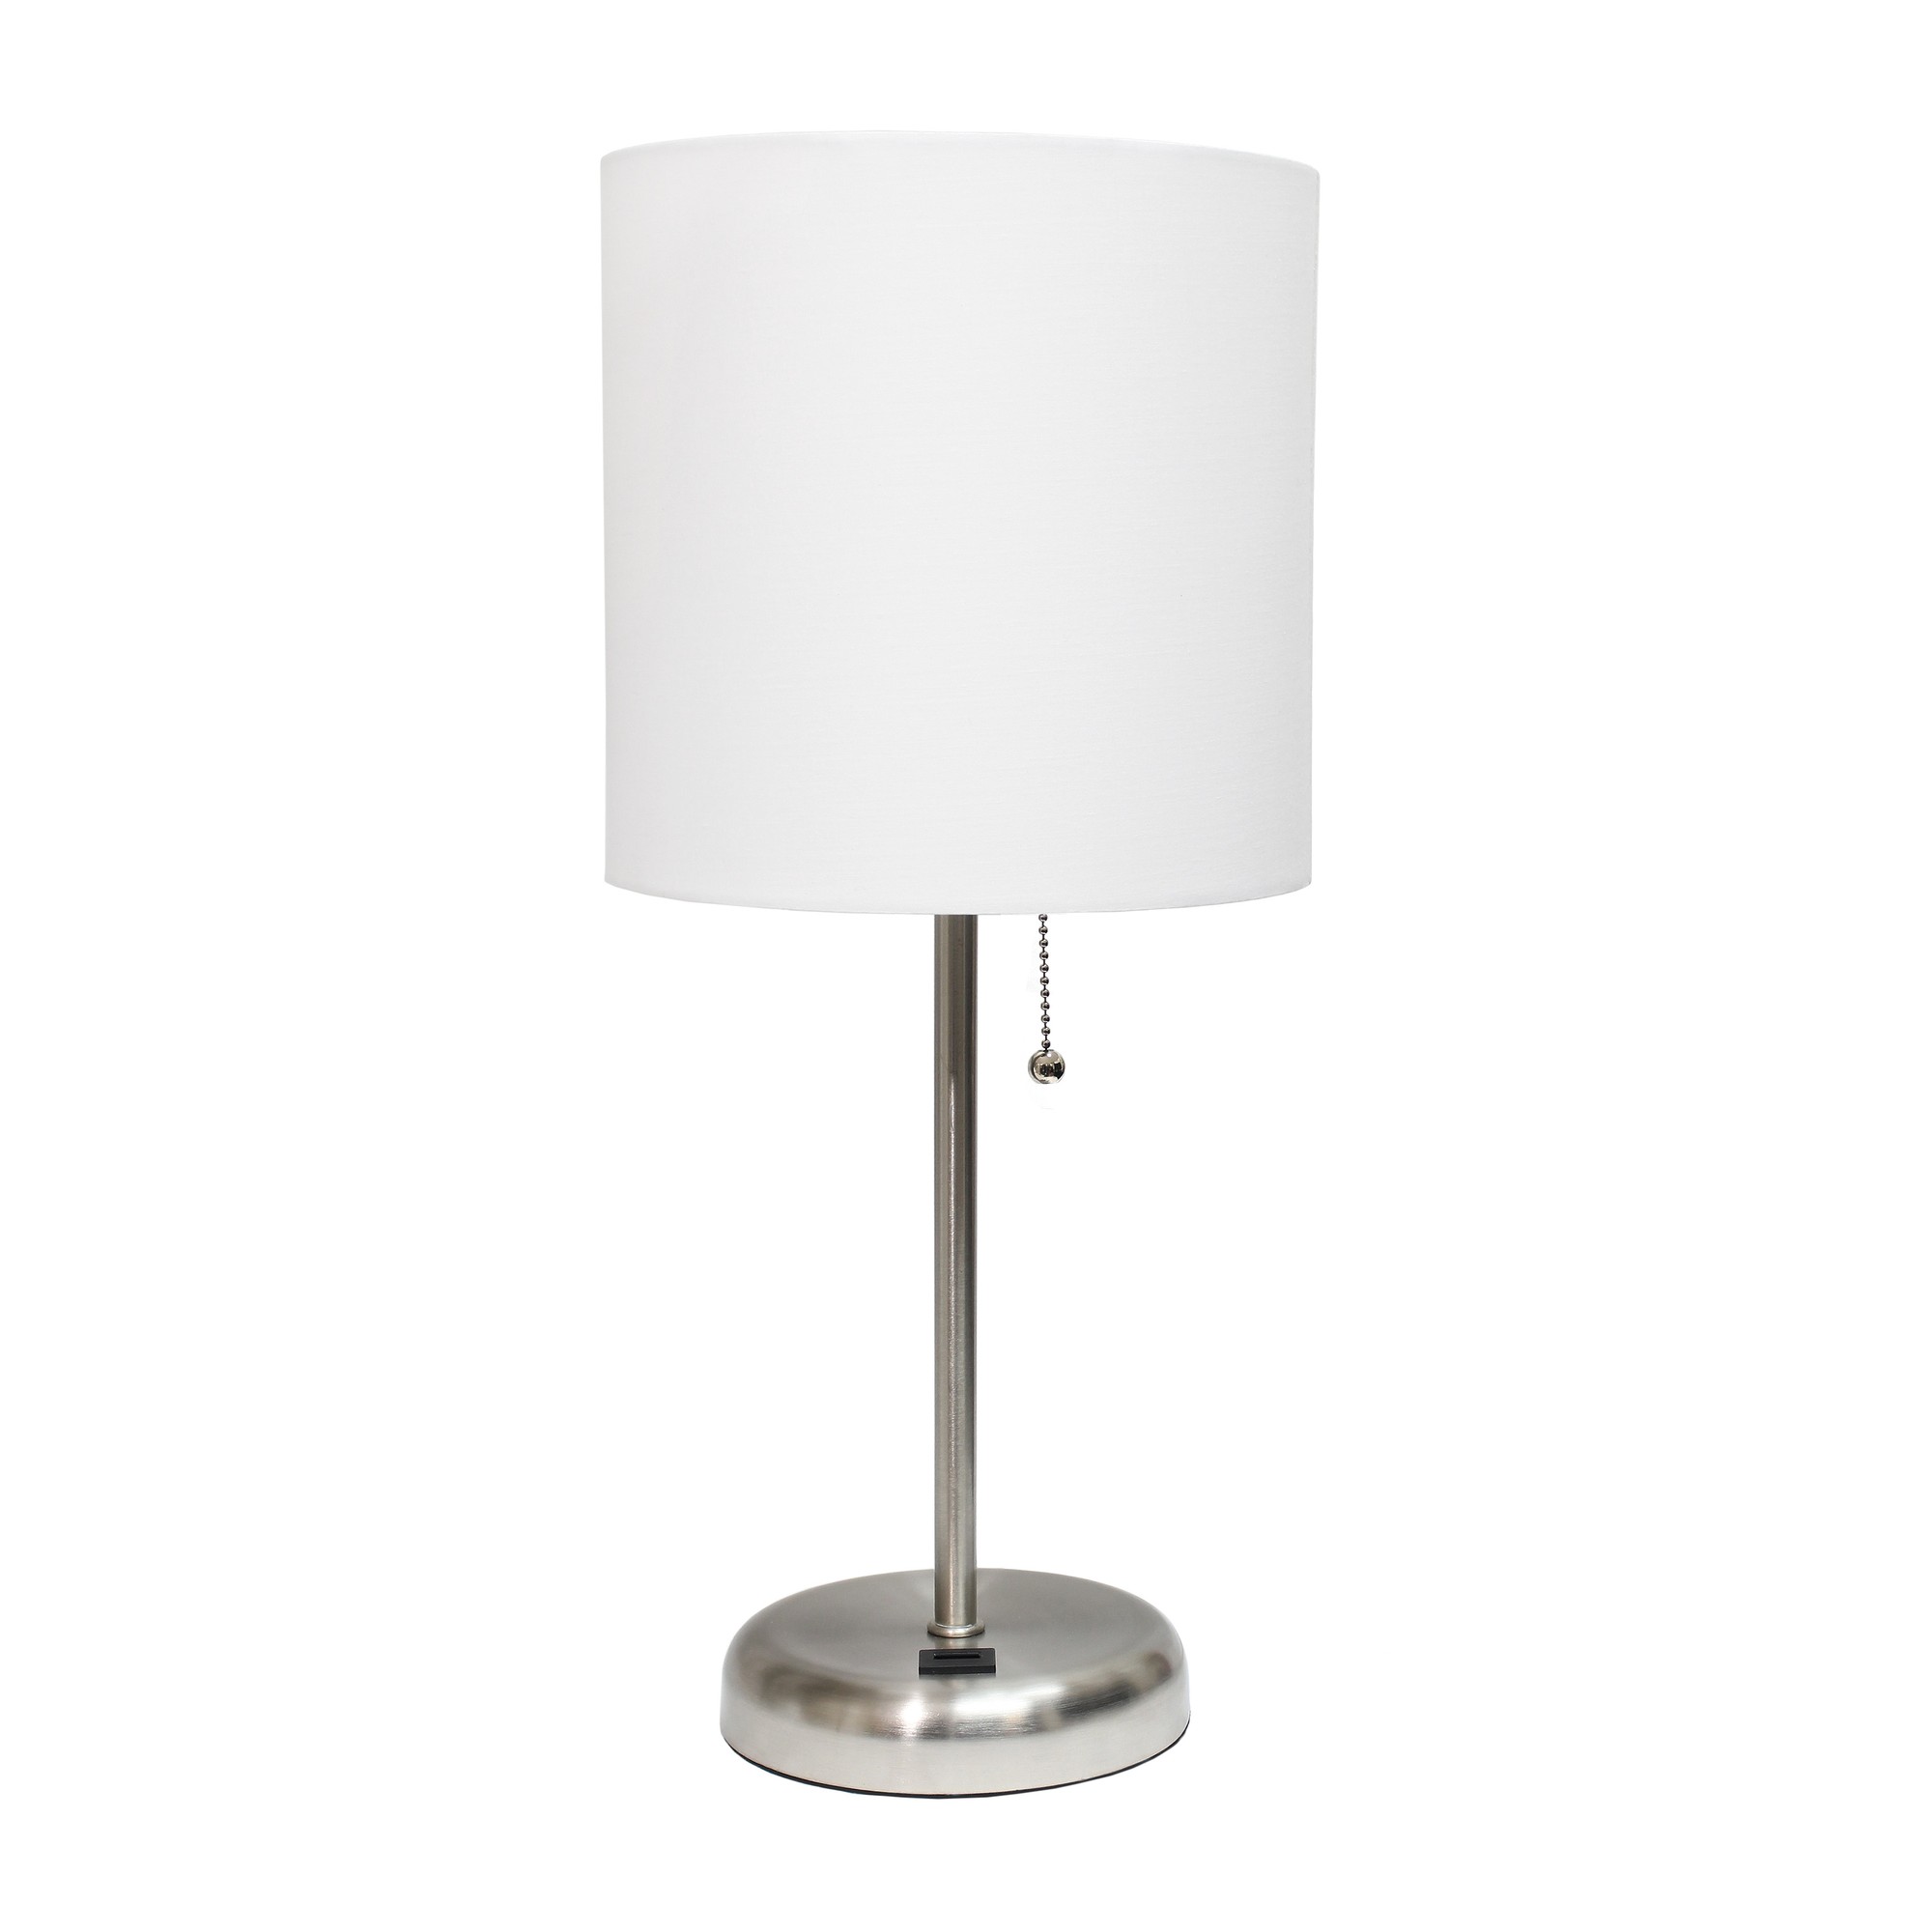 Simple Designs Stick Lamp with USB charging port and Fabric Shade, White